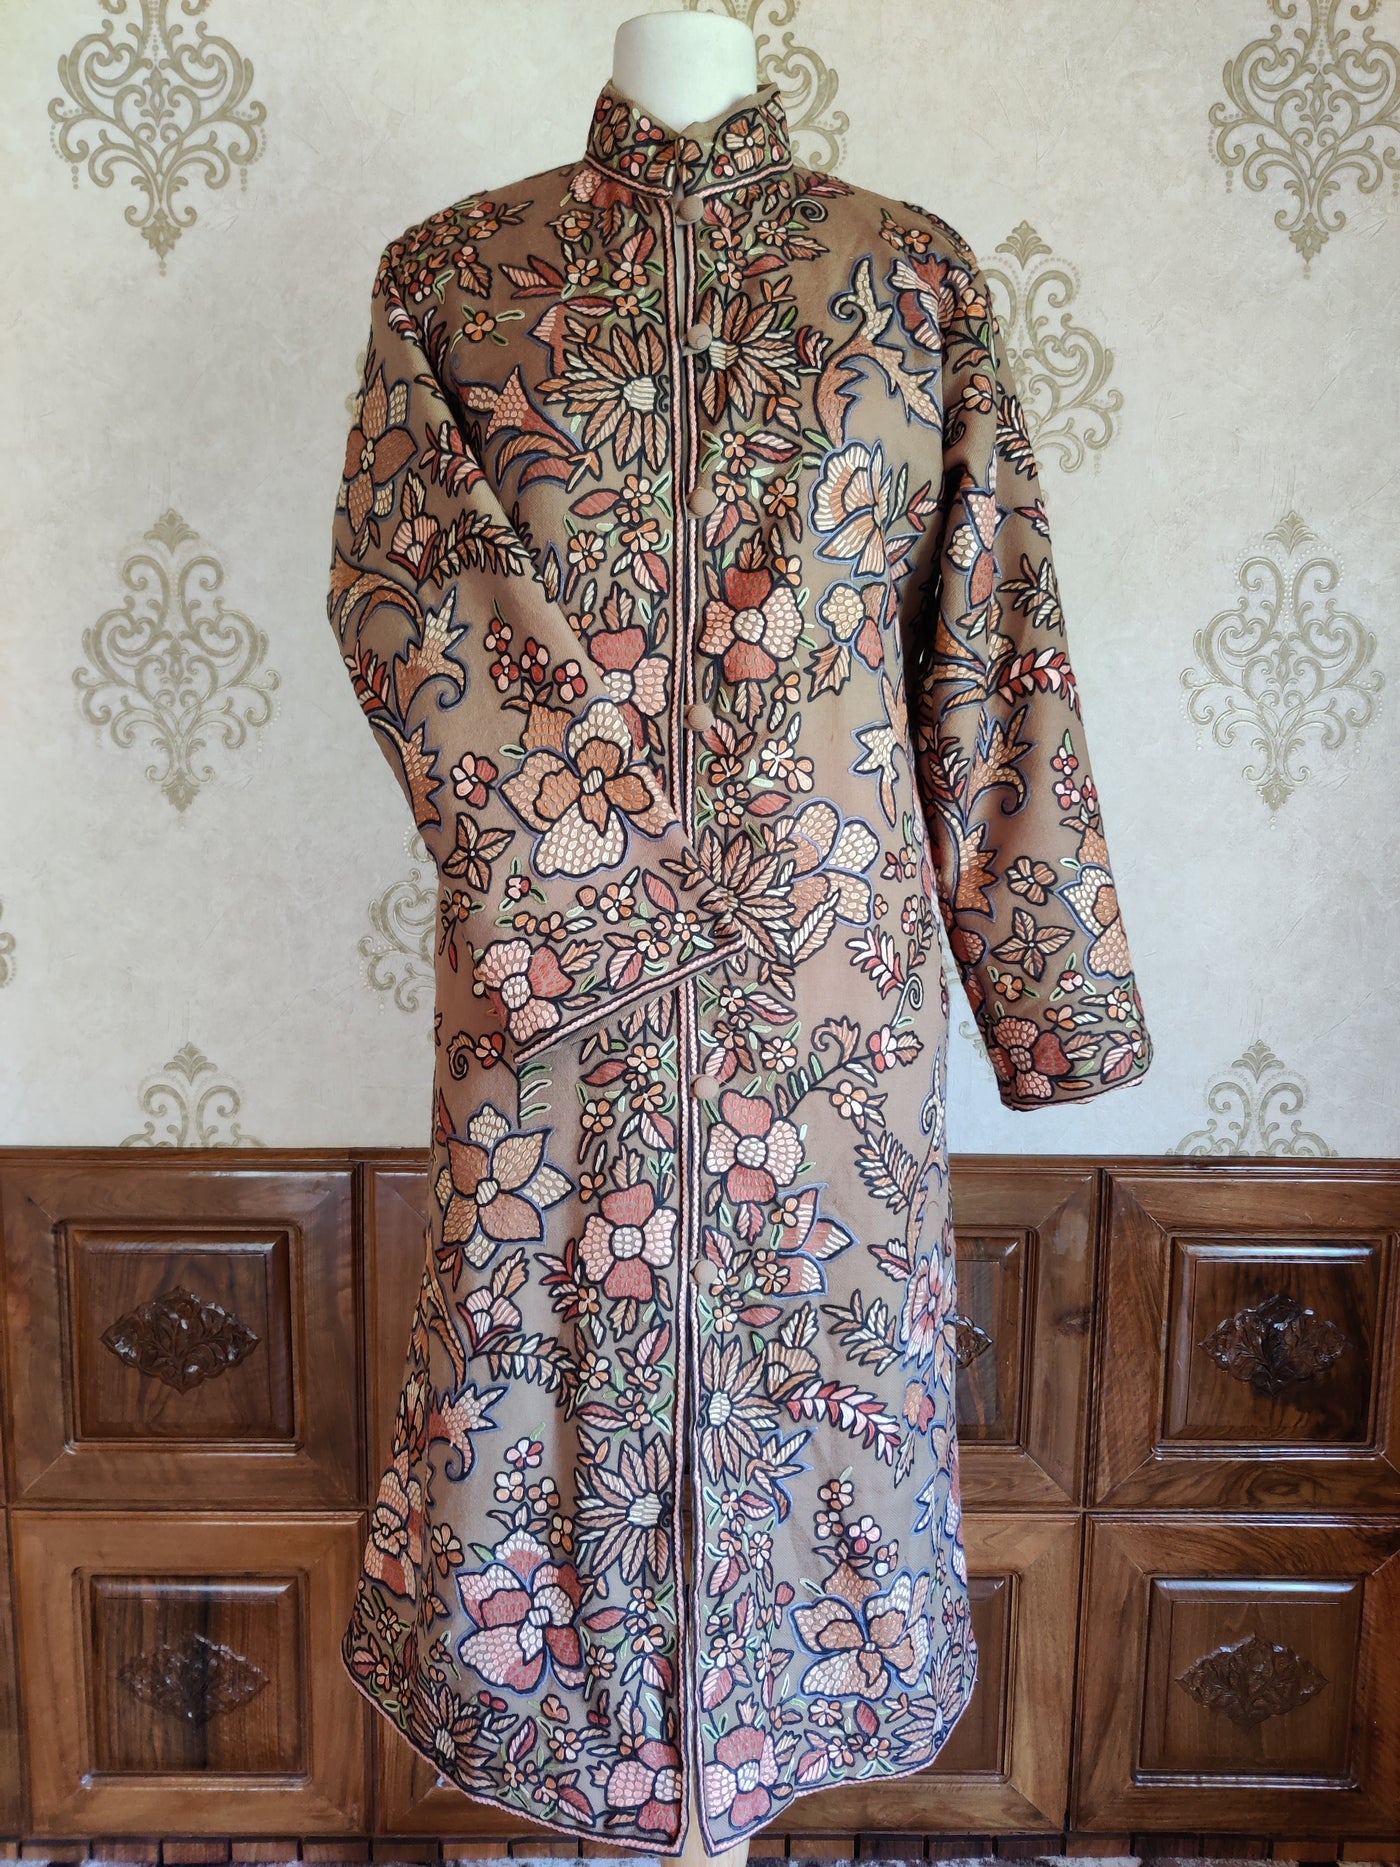 Beige Wool Jacket with Intricate Hand Aari Floral Embroidery